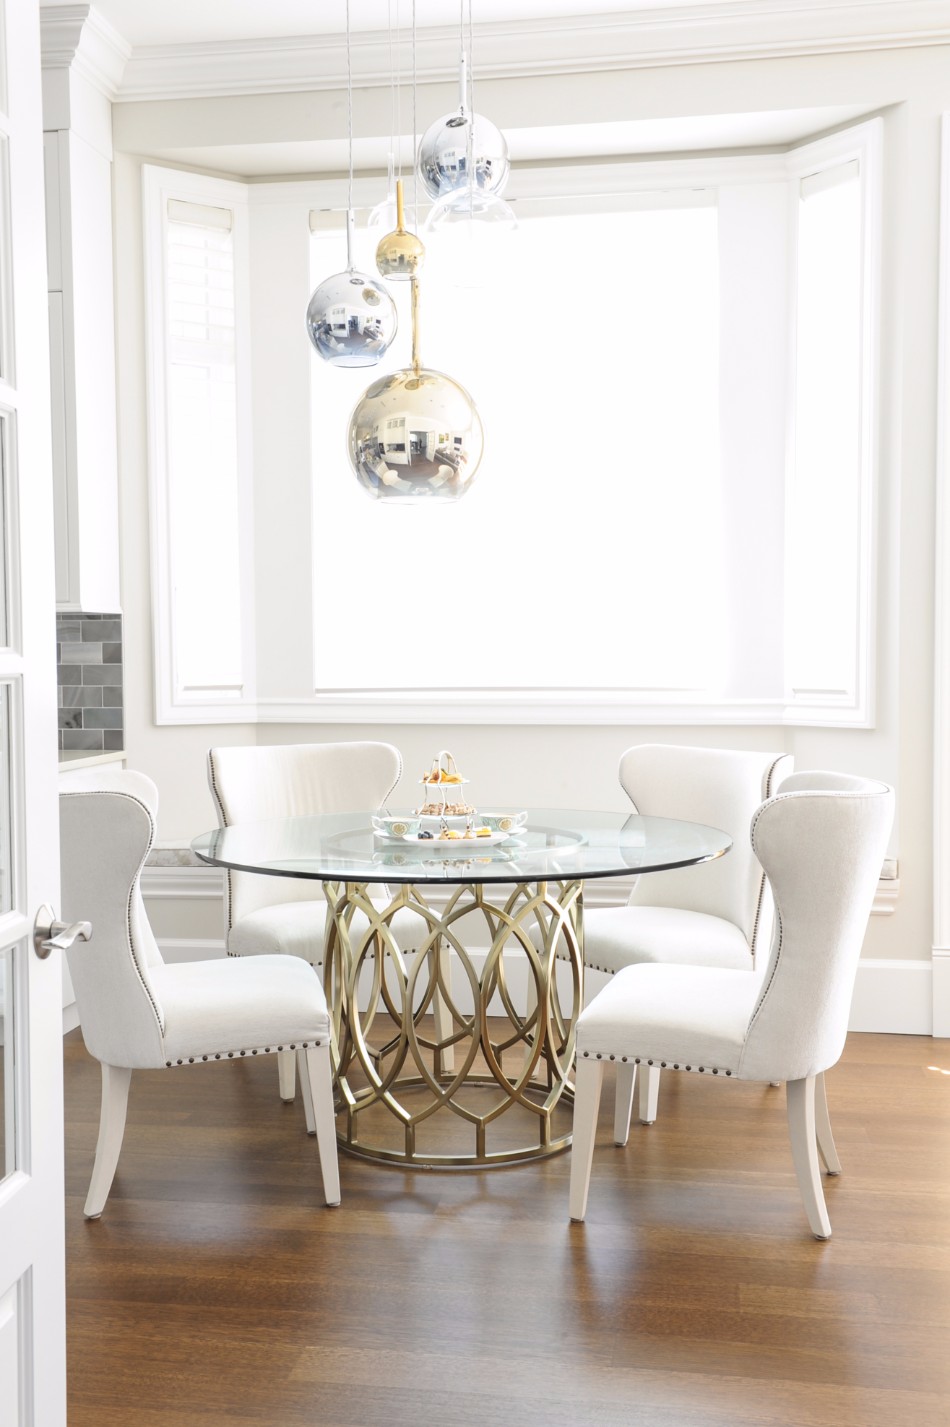 10 Beautiful Glass Dining Tables (Part II)